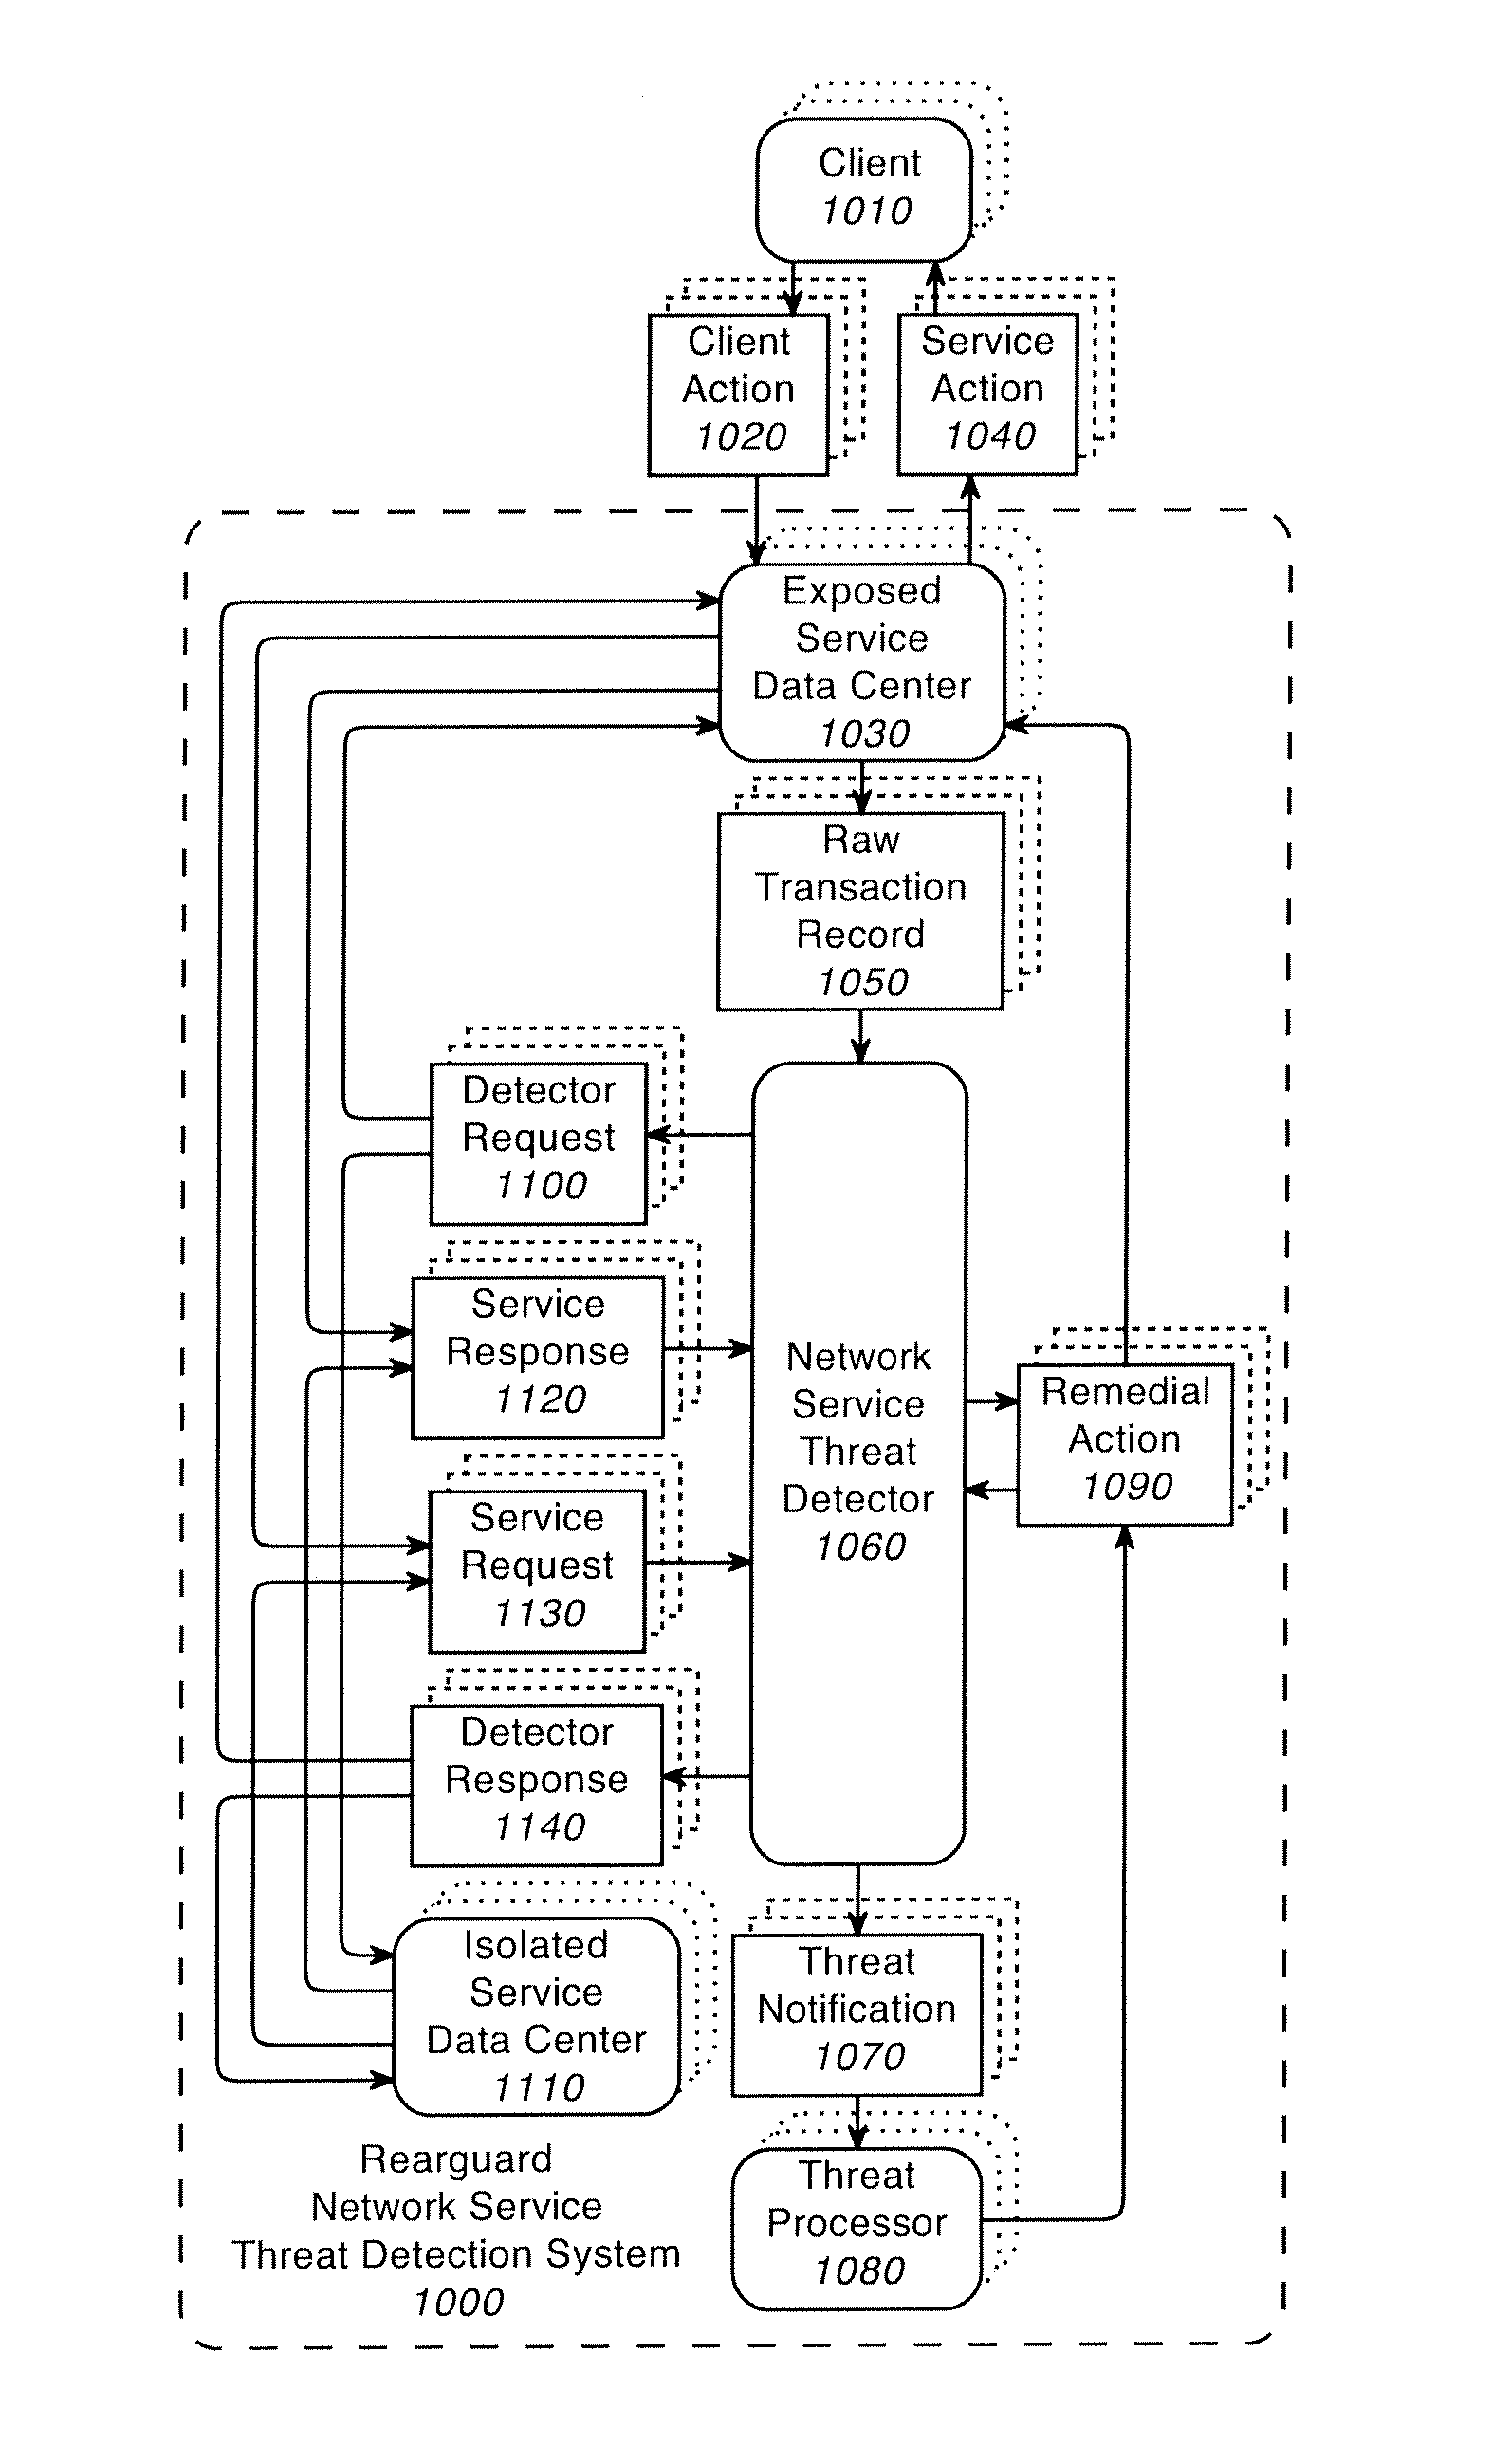 System and method for network security including detection of man-in-the-browser attacks